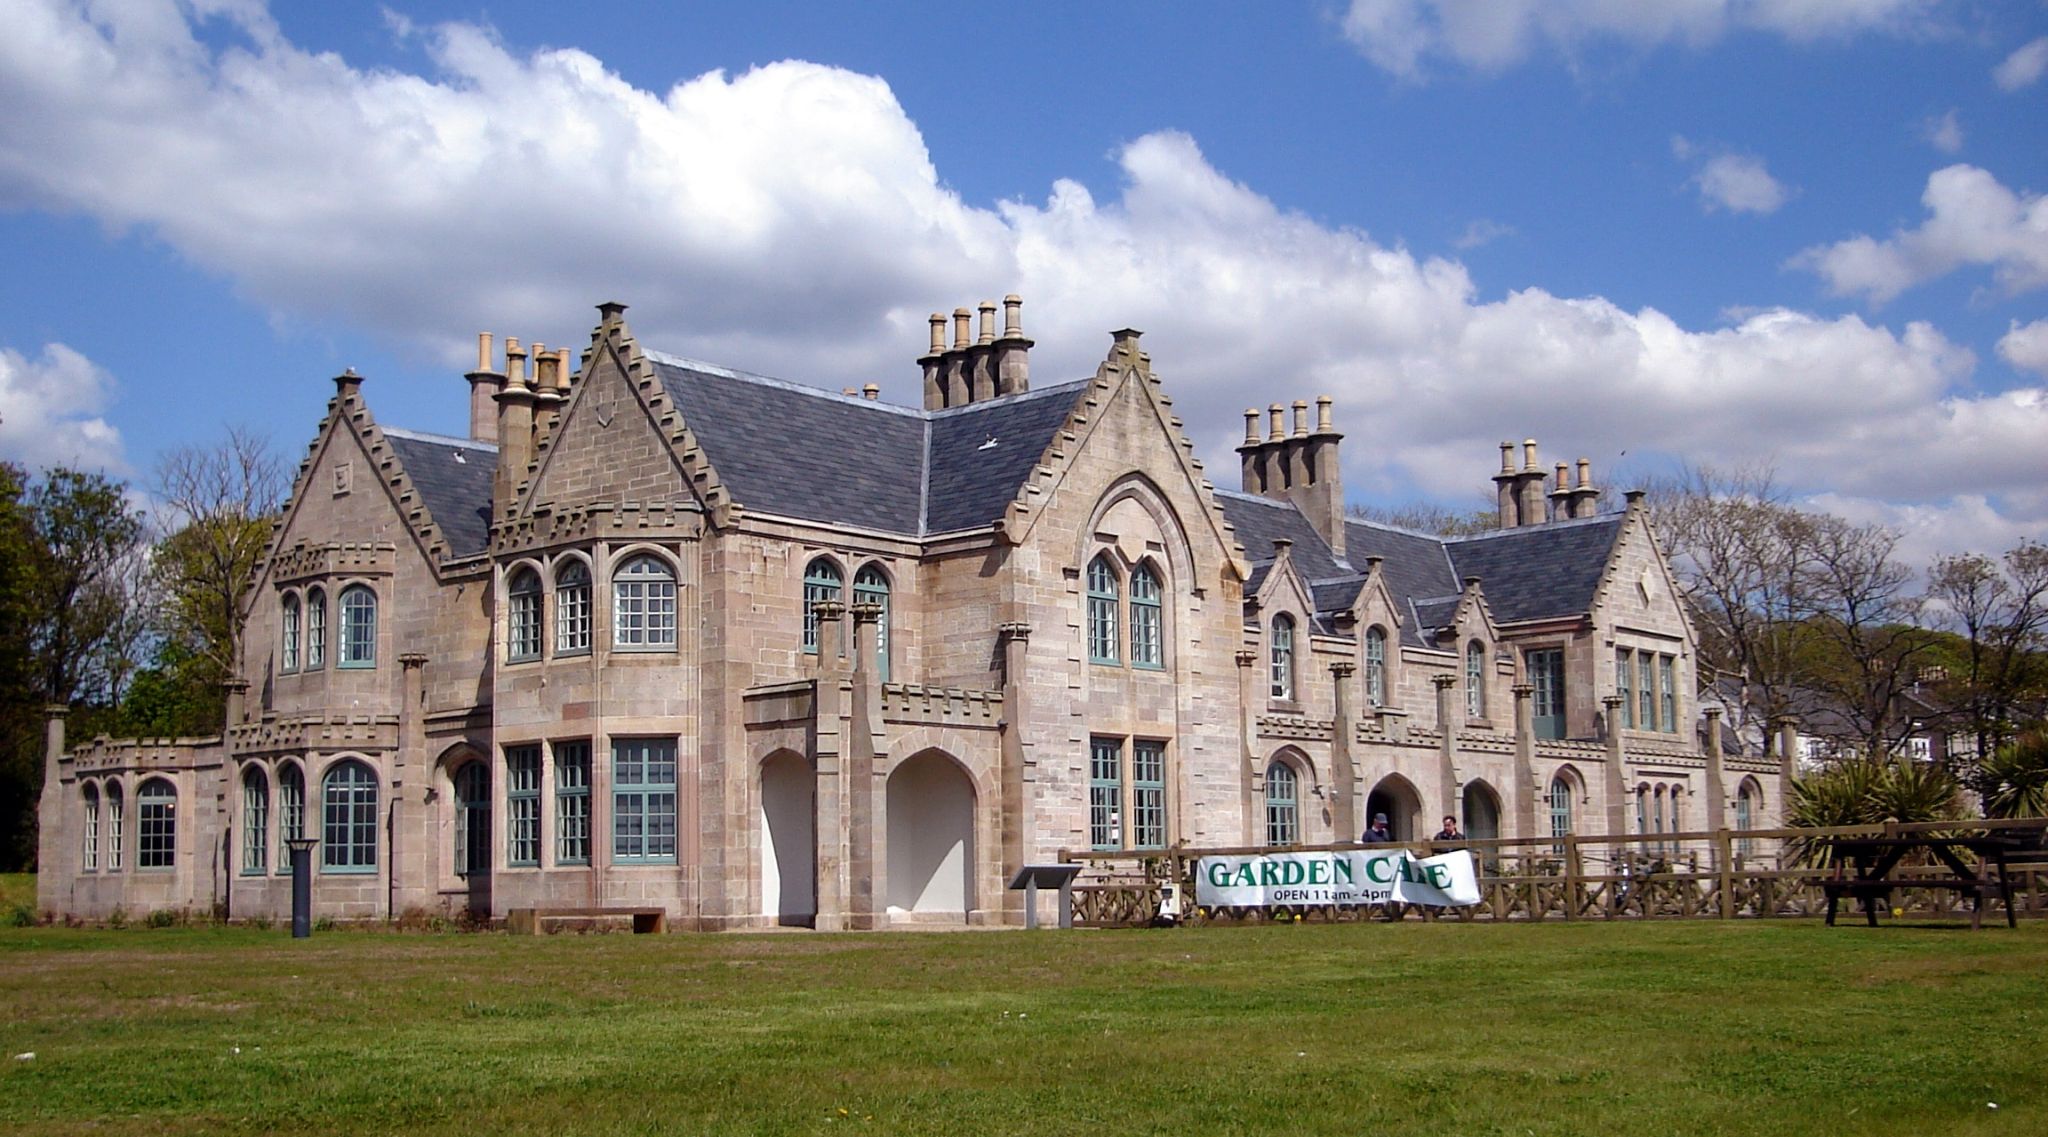 Garrison House in Millport on the Isle of Great Cumbrae